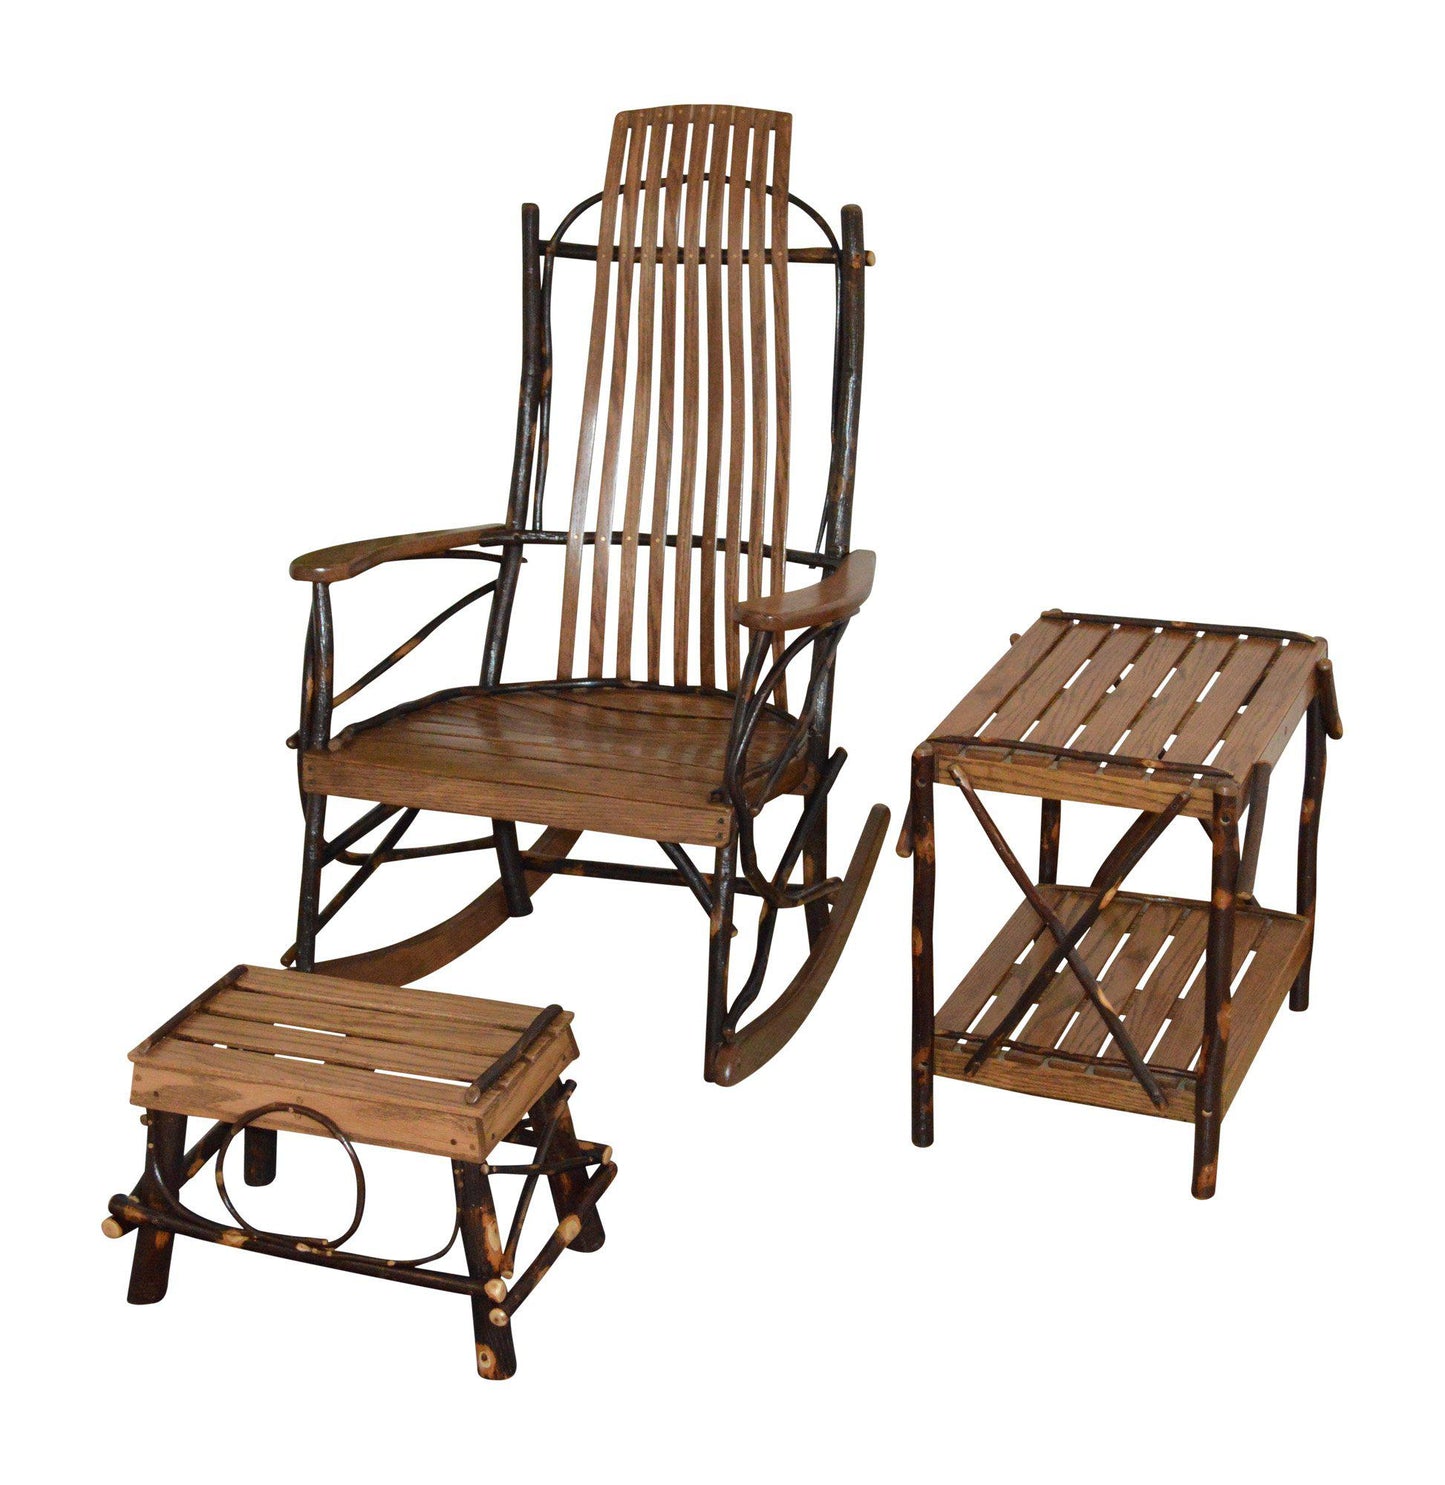 A&L Furniture Co. Amish Bentwood Hickory 9-Slat Rocker Chair w Foot Stool / End Table Set - LEAD TIME TO SHIP 10 BUSINESS DAYS